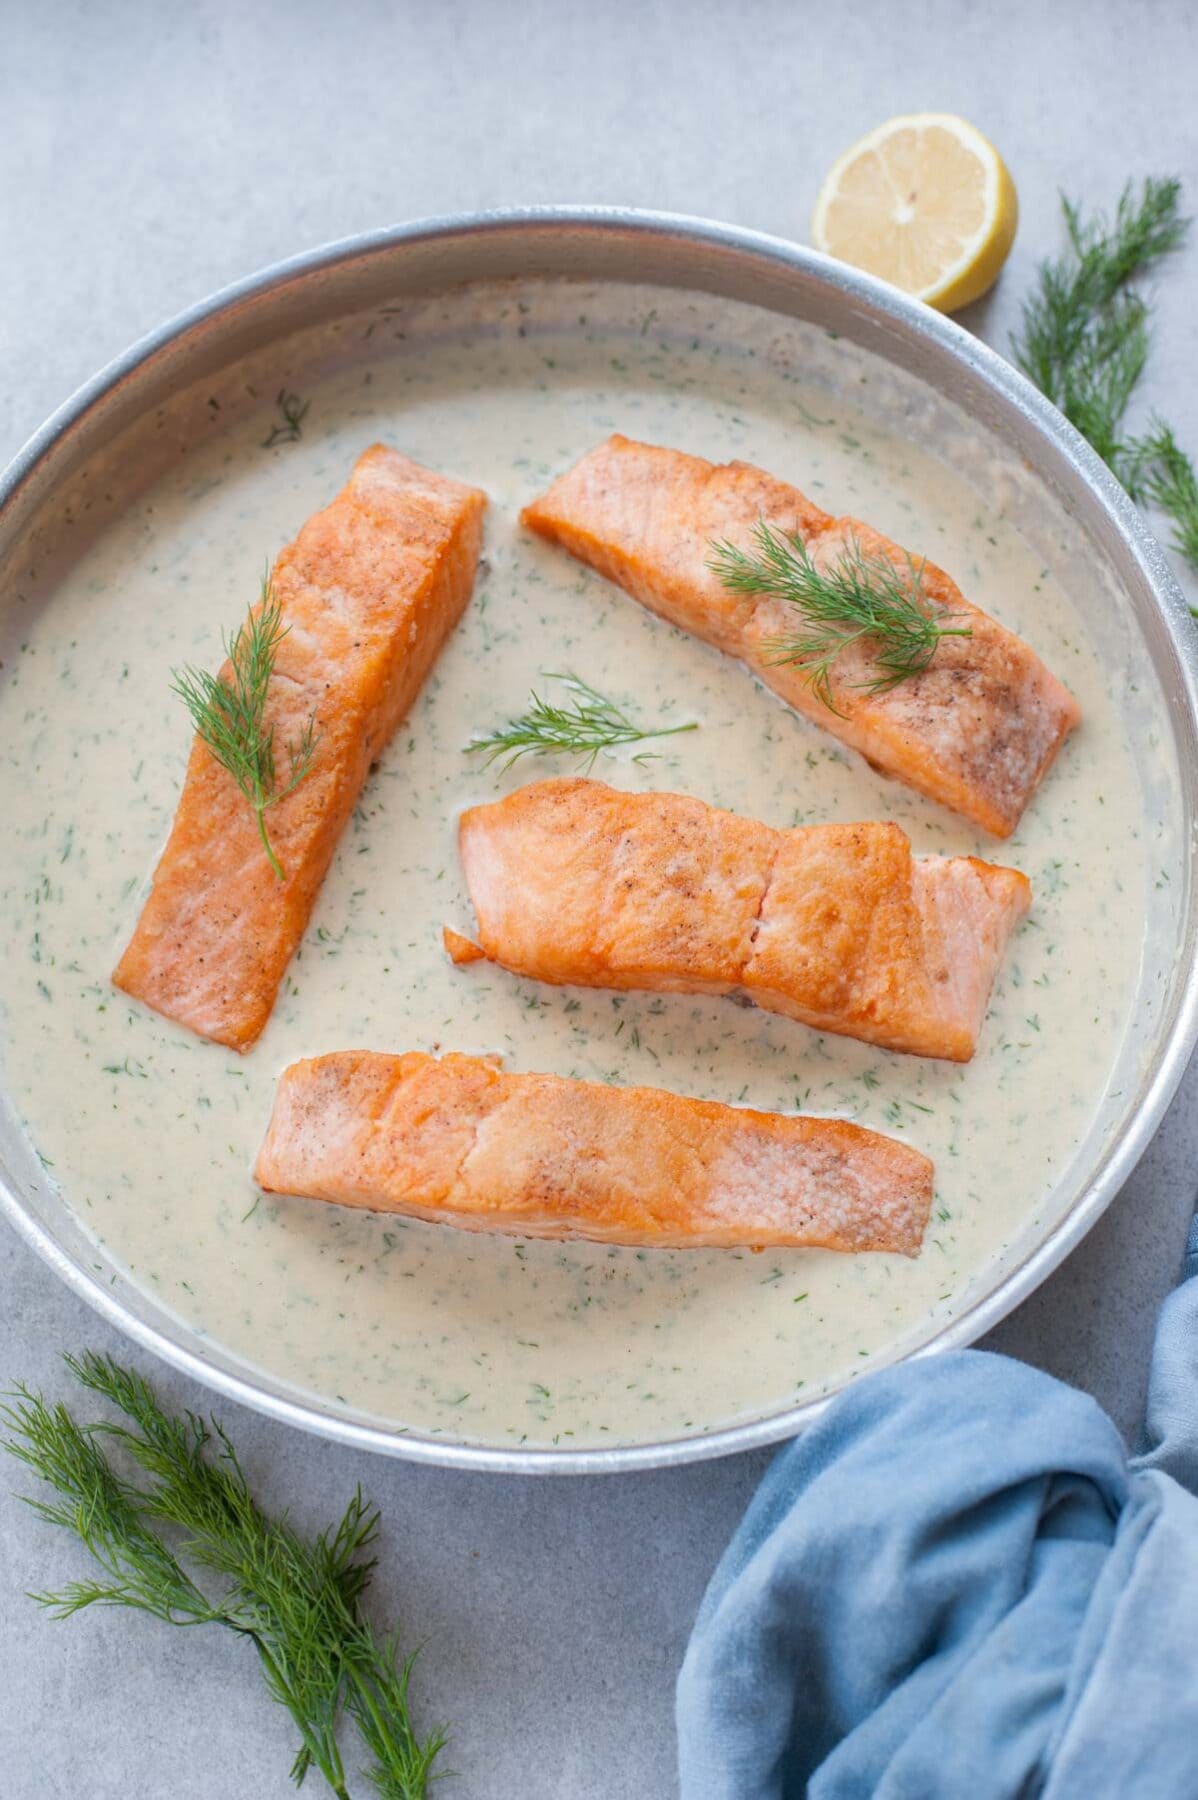 Salmon with creamy dill sauce in a frying pan. Blue kitchen cloth and dill in the background.